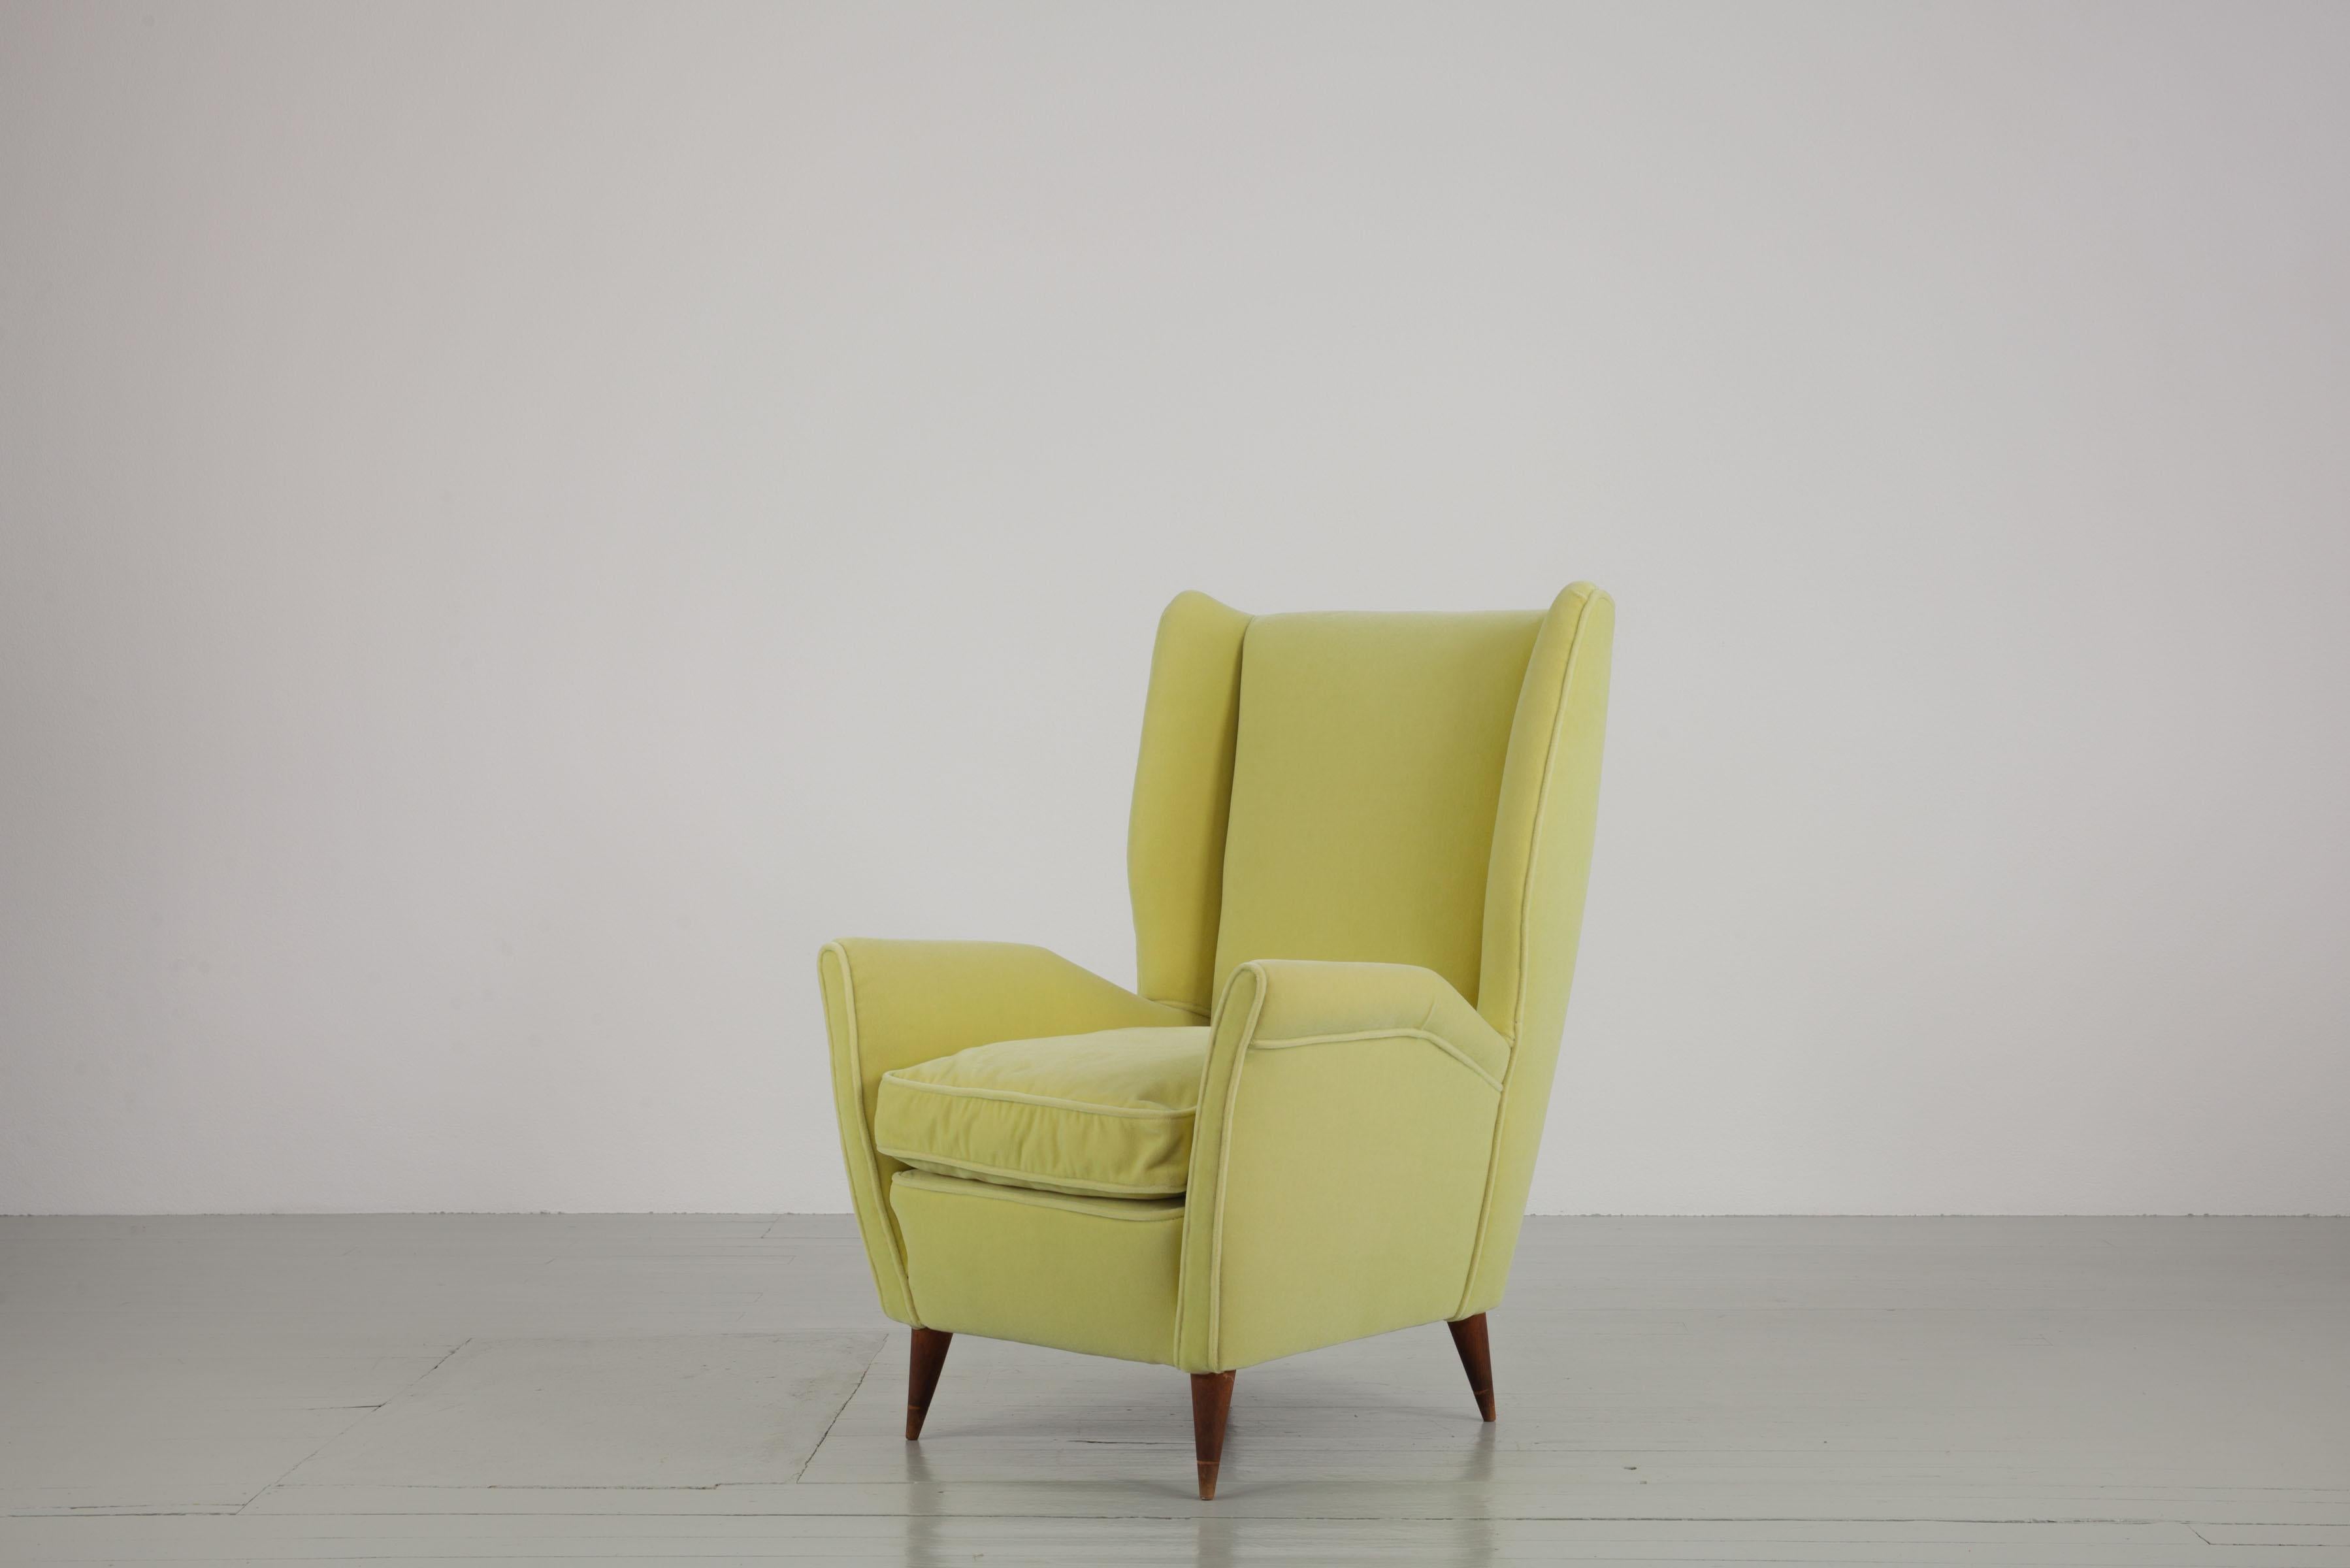 Italian Yellow Wingback Chair, Produced by I.S.A. Bergamo, 1950s For Sale 4